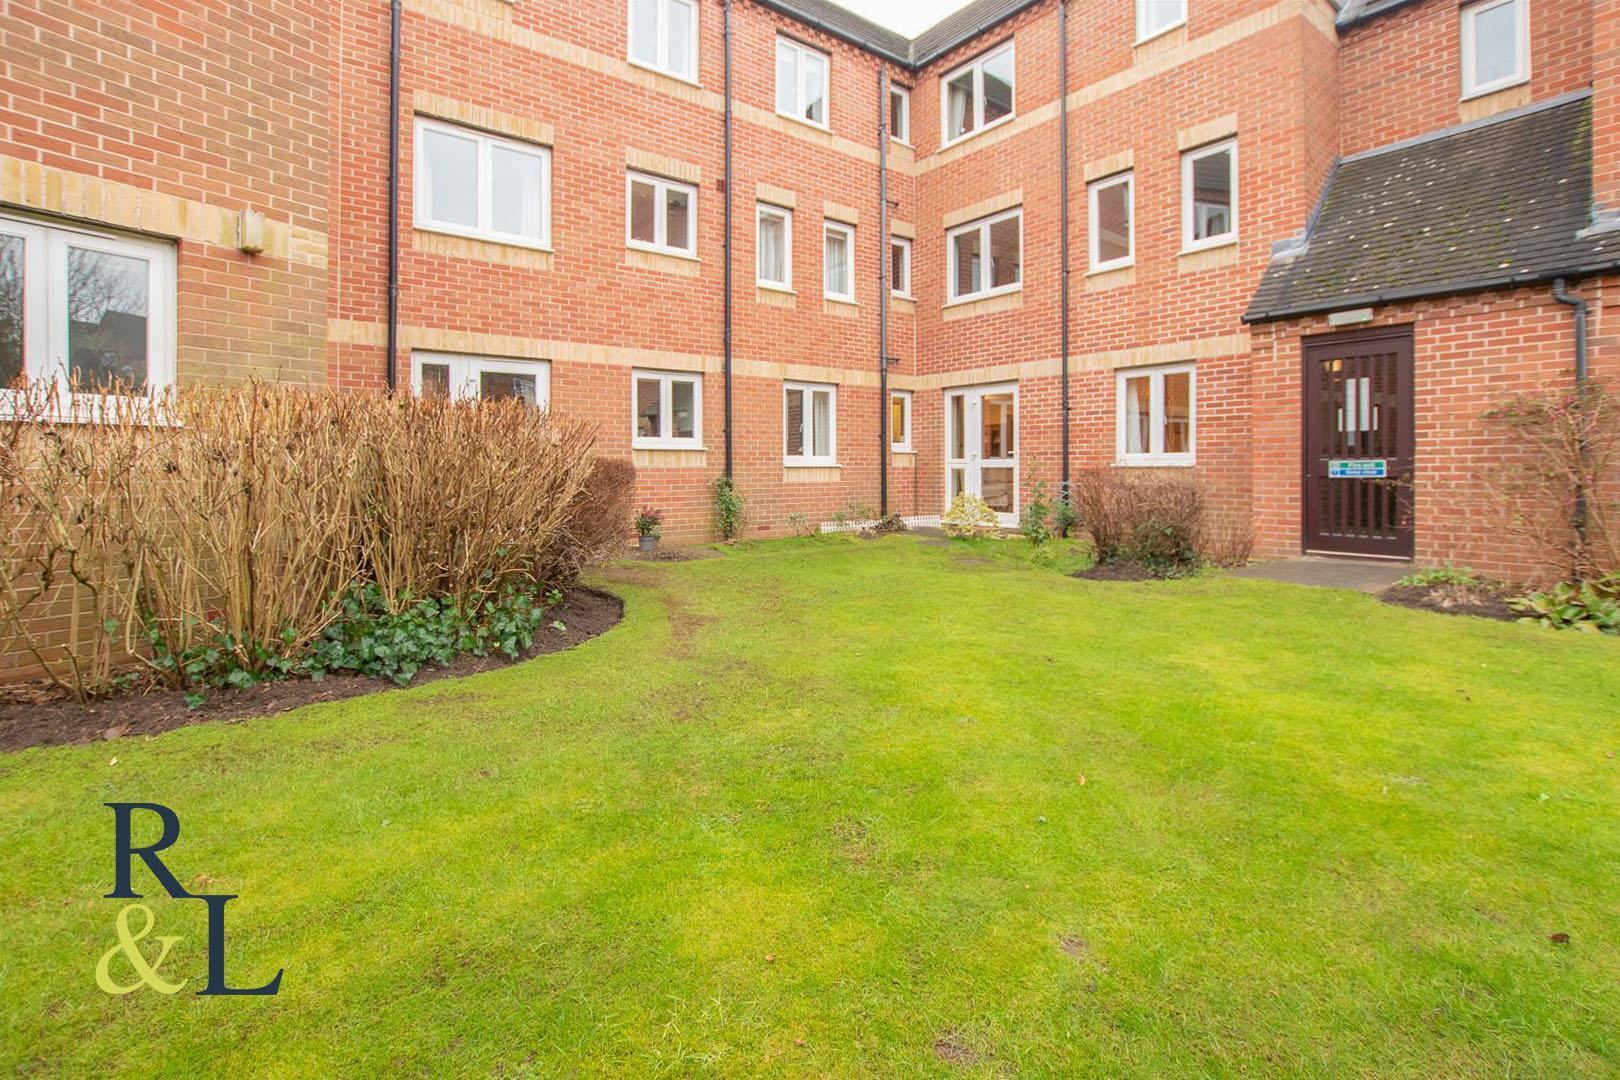 Property image for Giles Court Rectory Road, West Bridgford, Nottingham